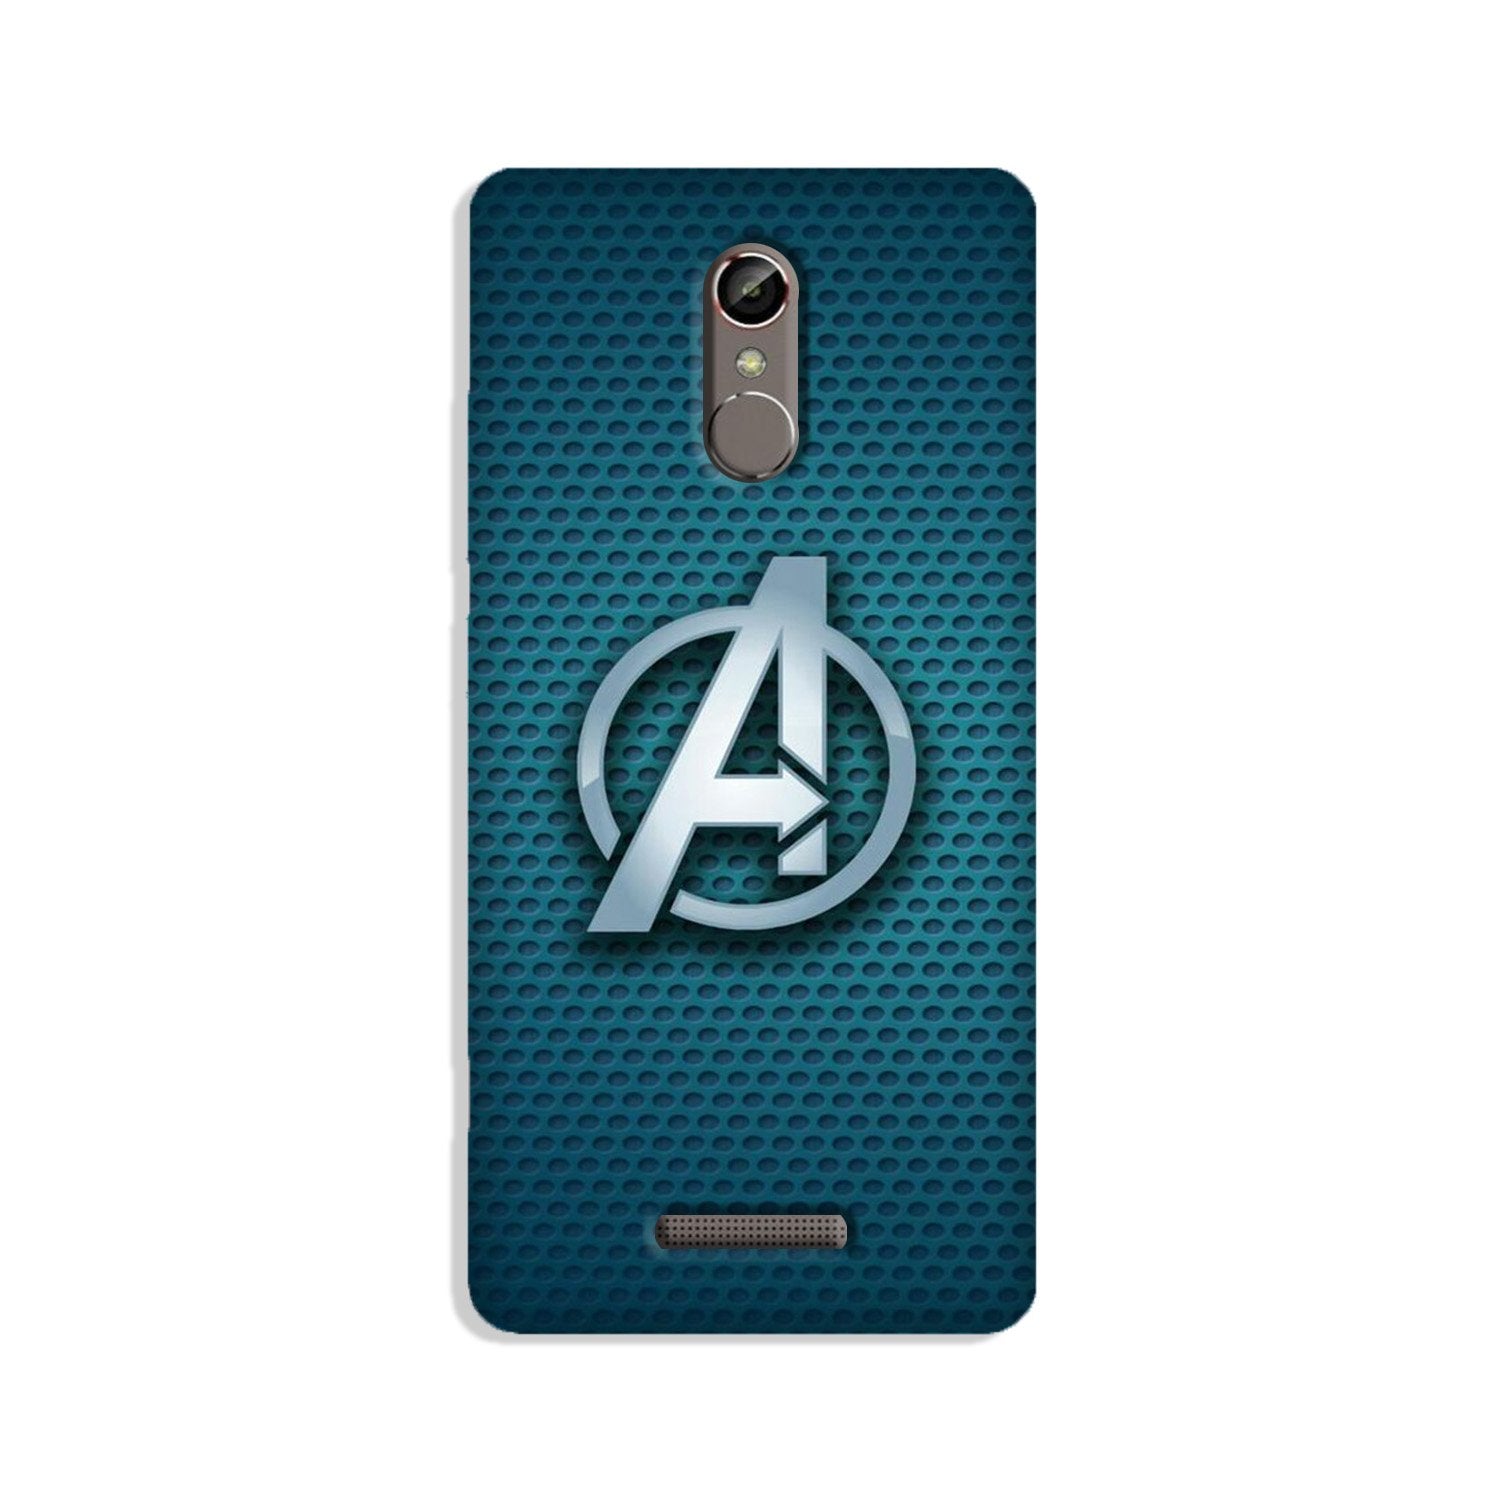 Avengers Case for Gionee S6s (Design No. 246)